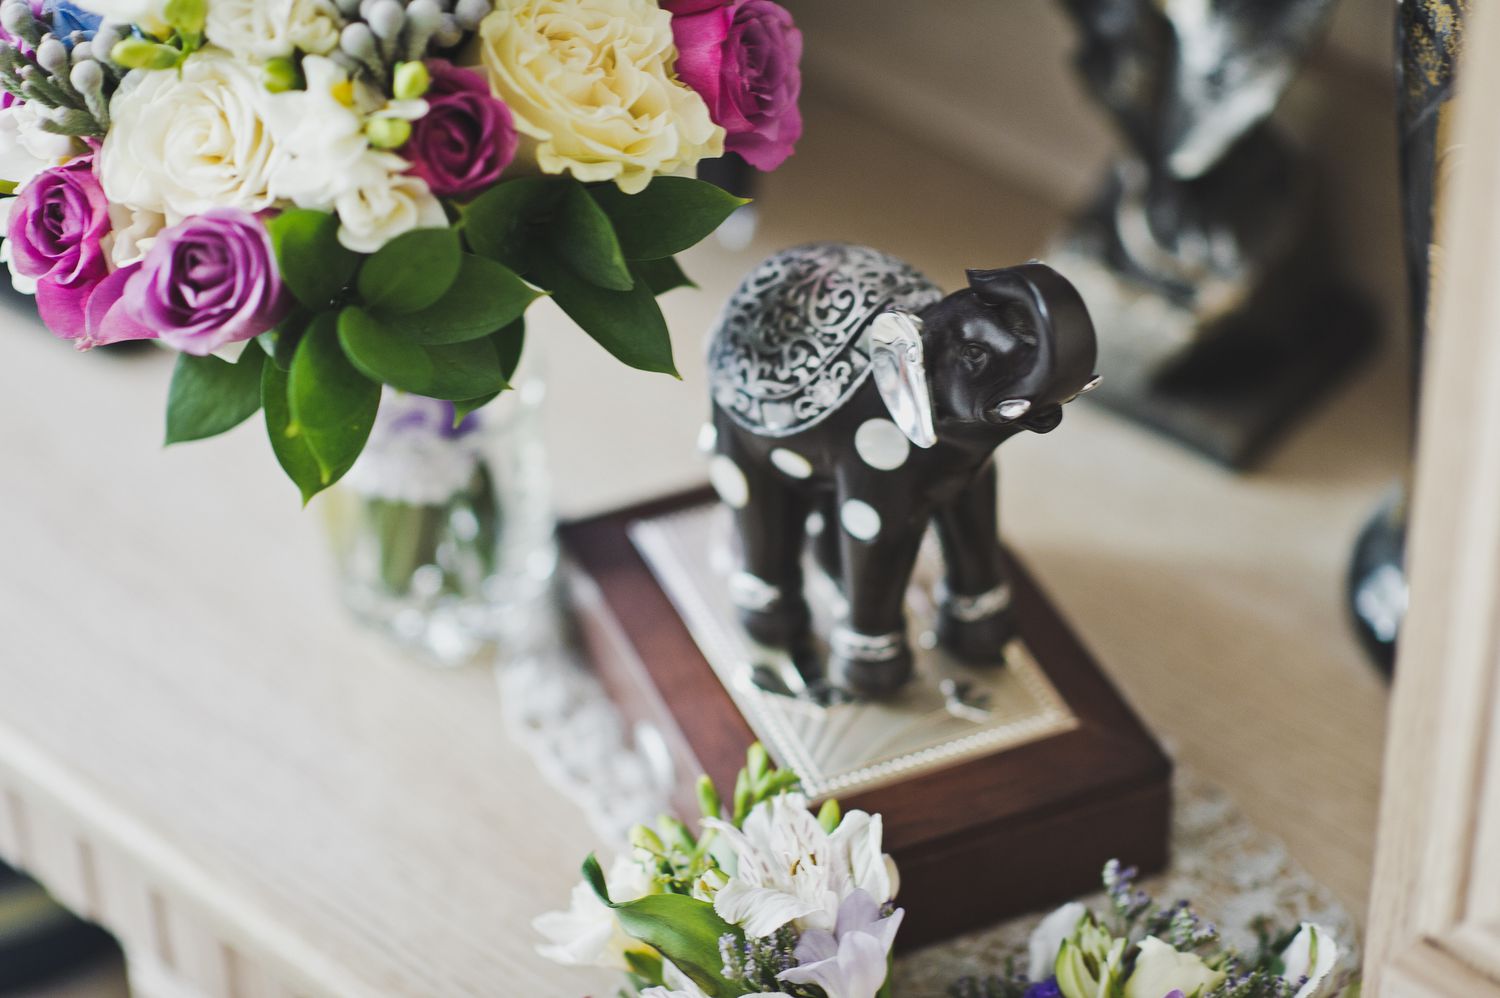 Elephant on table with flowers